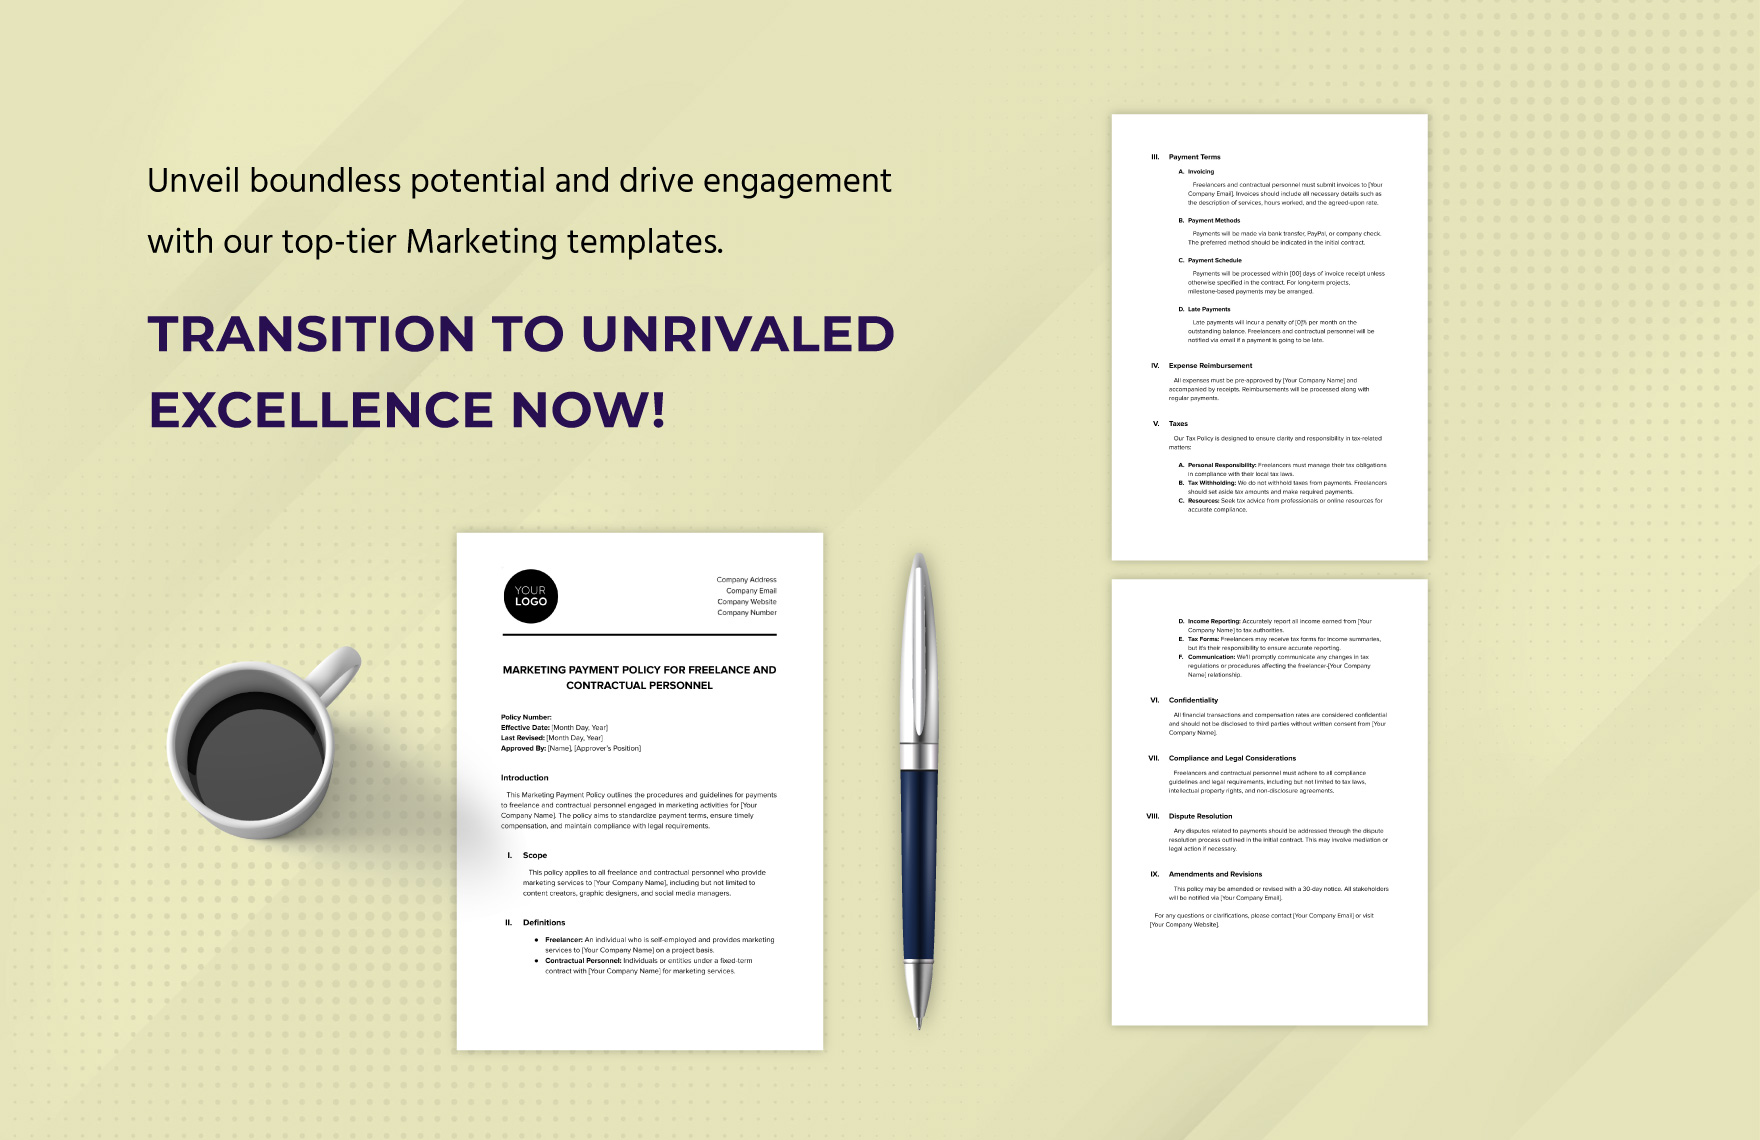 Marketing Payment Policy for Freelance and Contractual Personnel Template